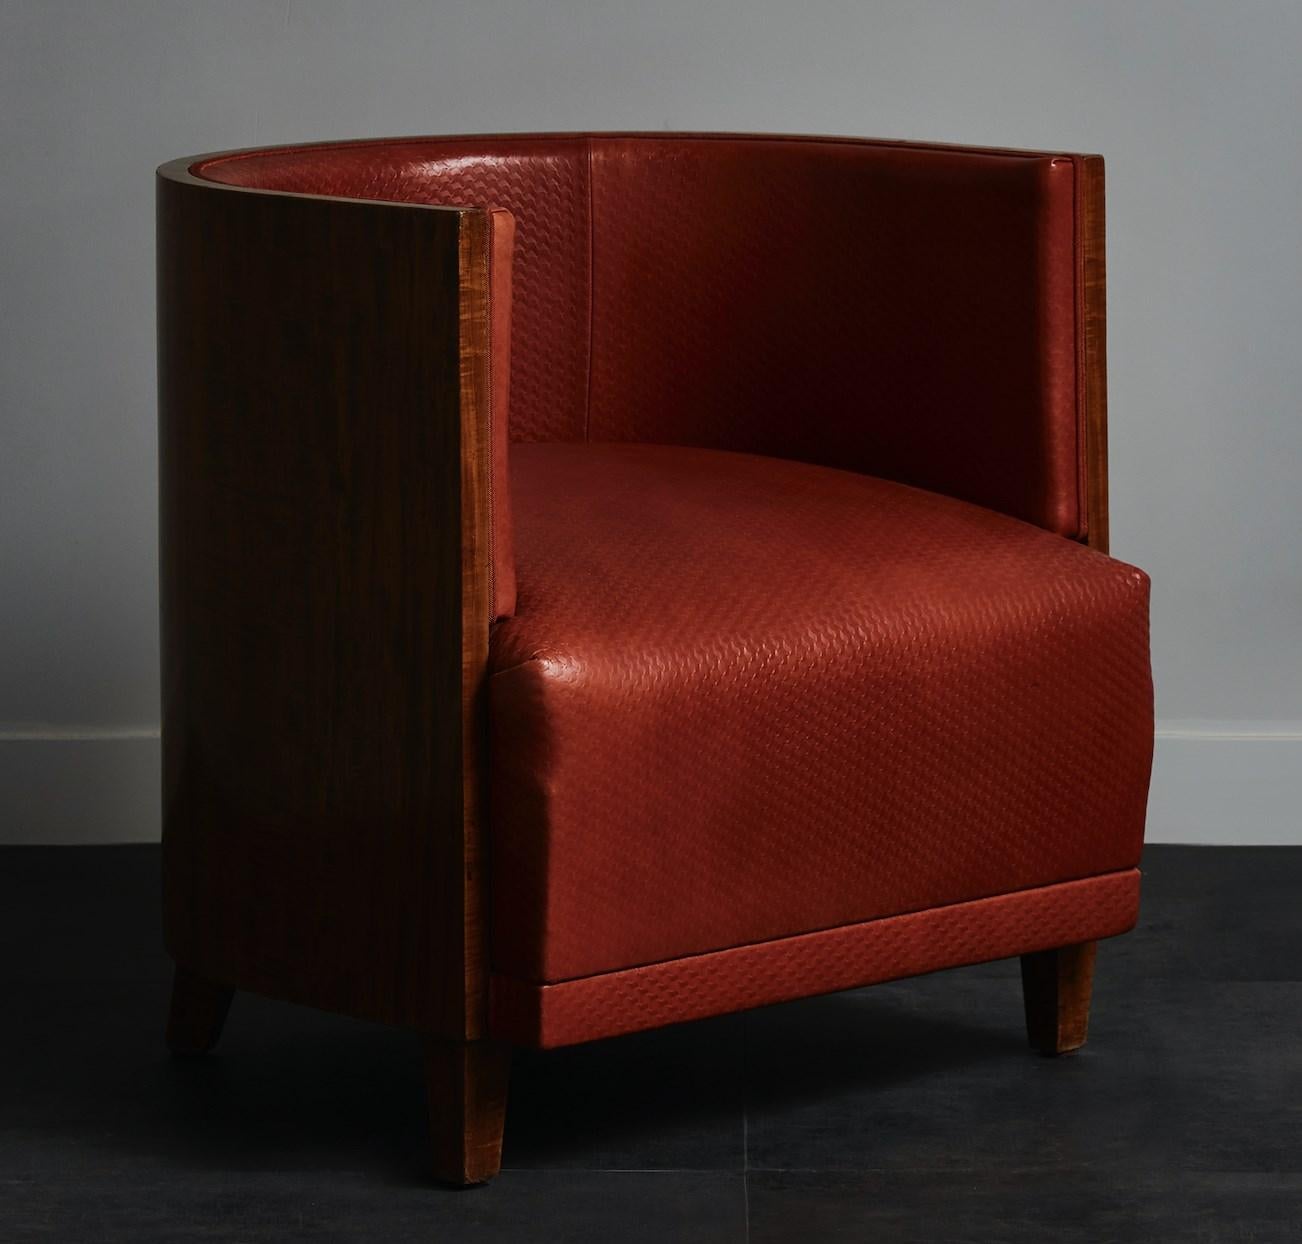 Old armchair in wood and havana leather.
France, 1930.